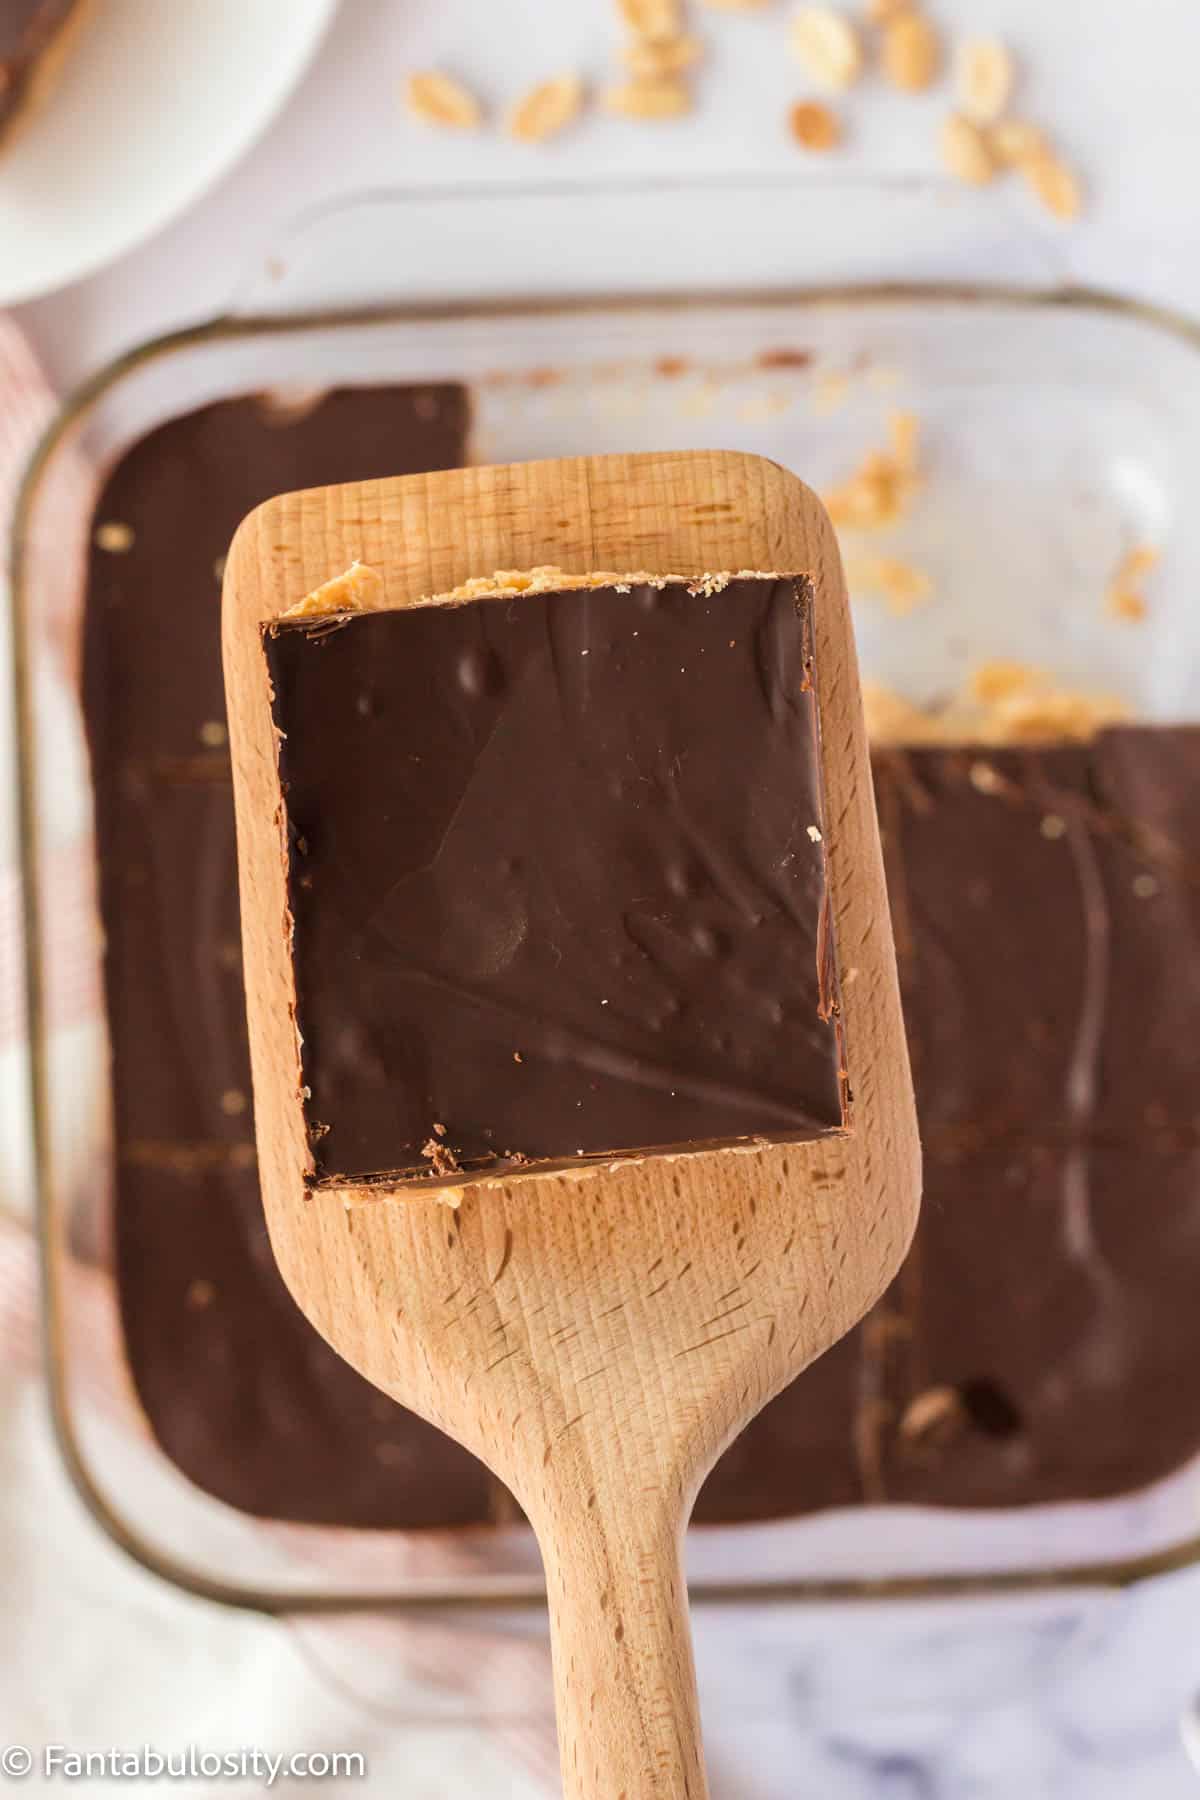 A chocolate peanut butter square on a spatula being held above the 8x8 pan of squares.